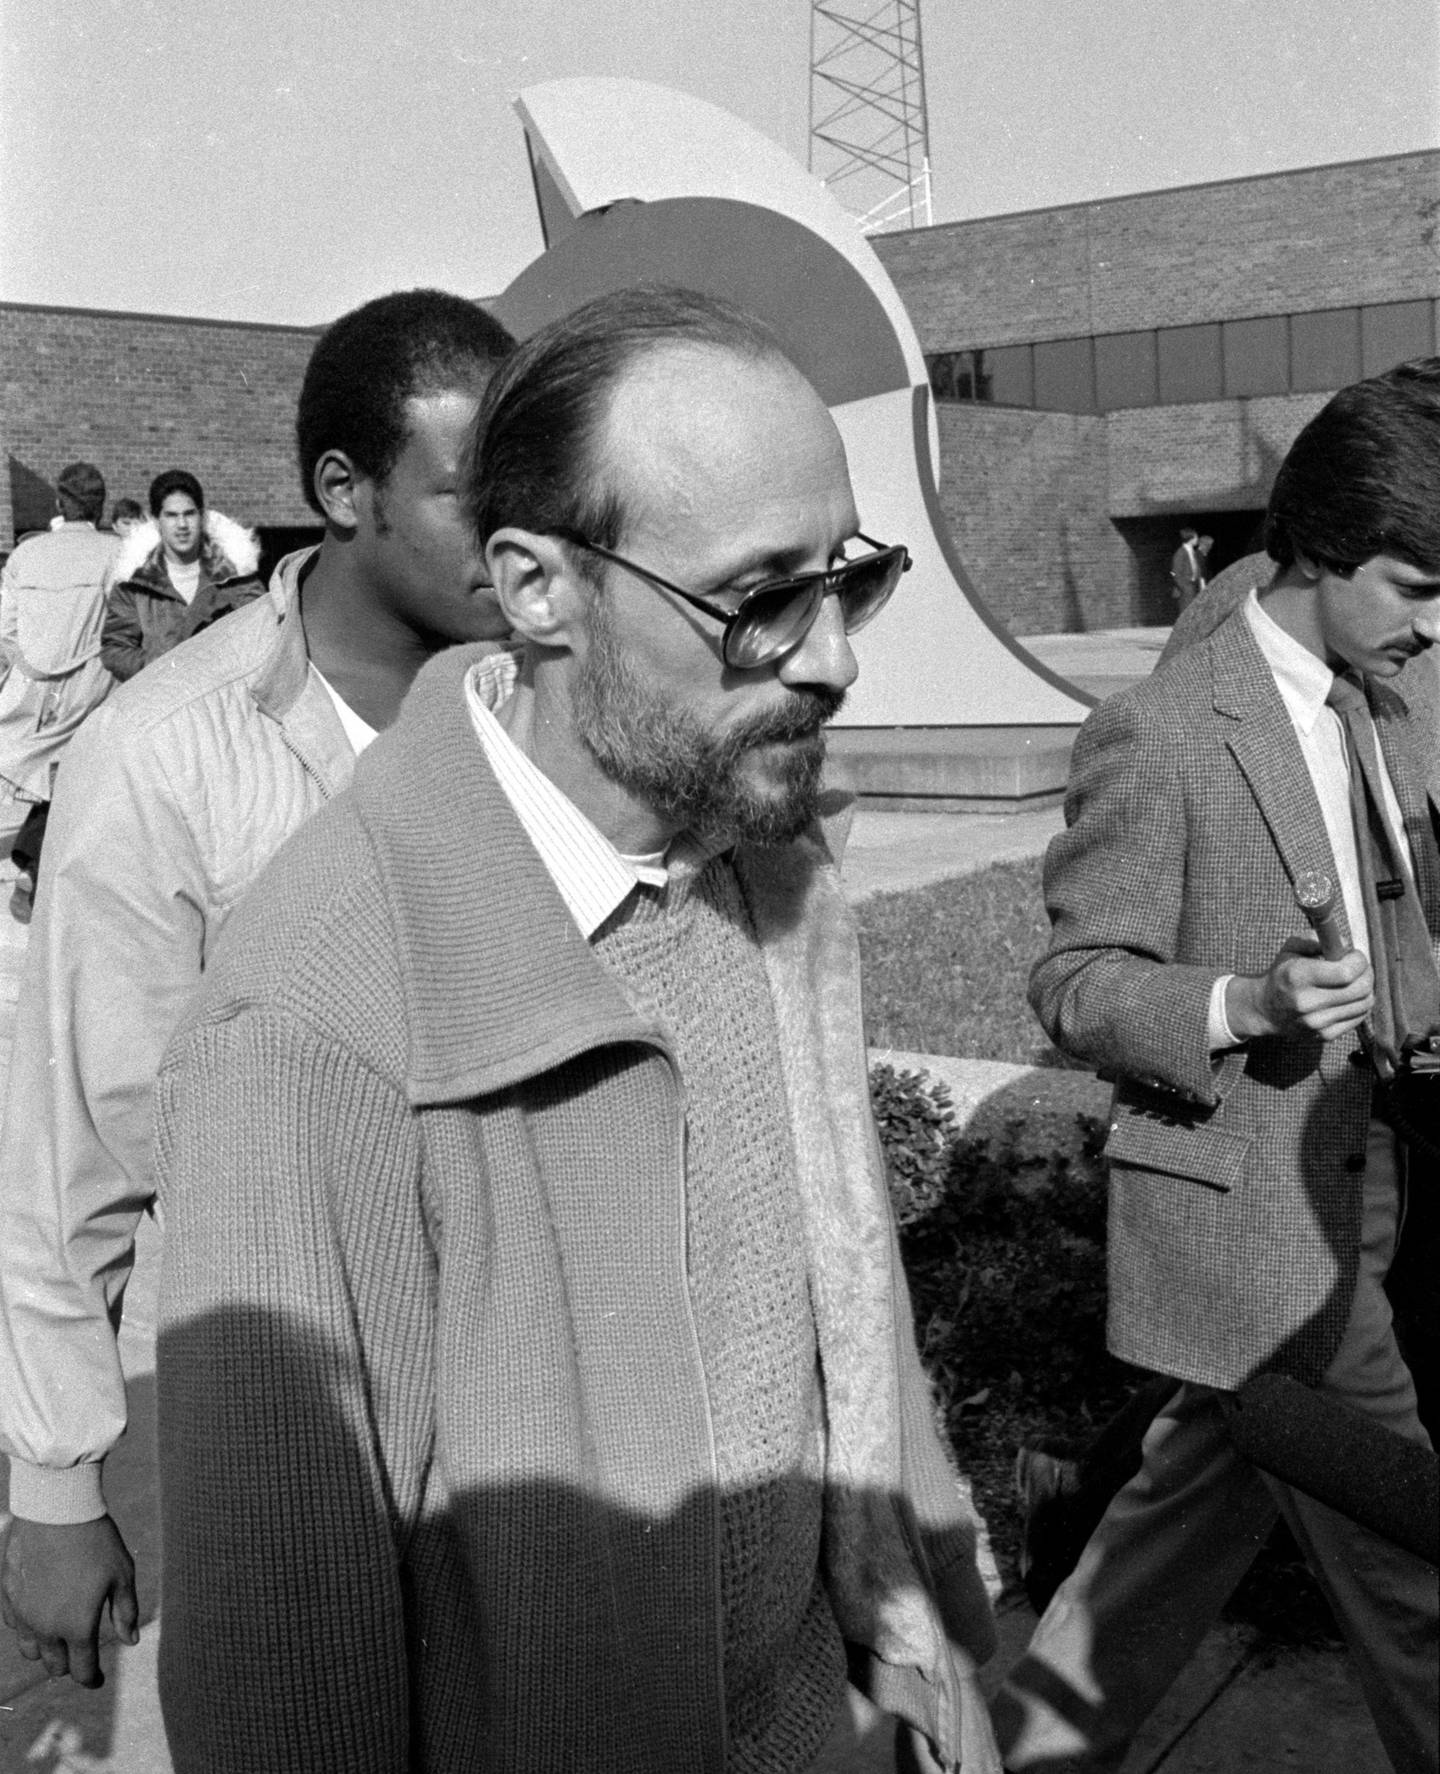 Roger Arnold, a onetime suspect in the Tylenol murders, leaves a court appearance related to misdemeanor weapons charges in October 1982.